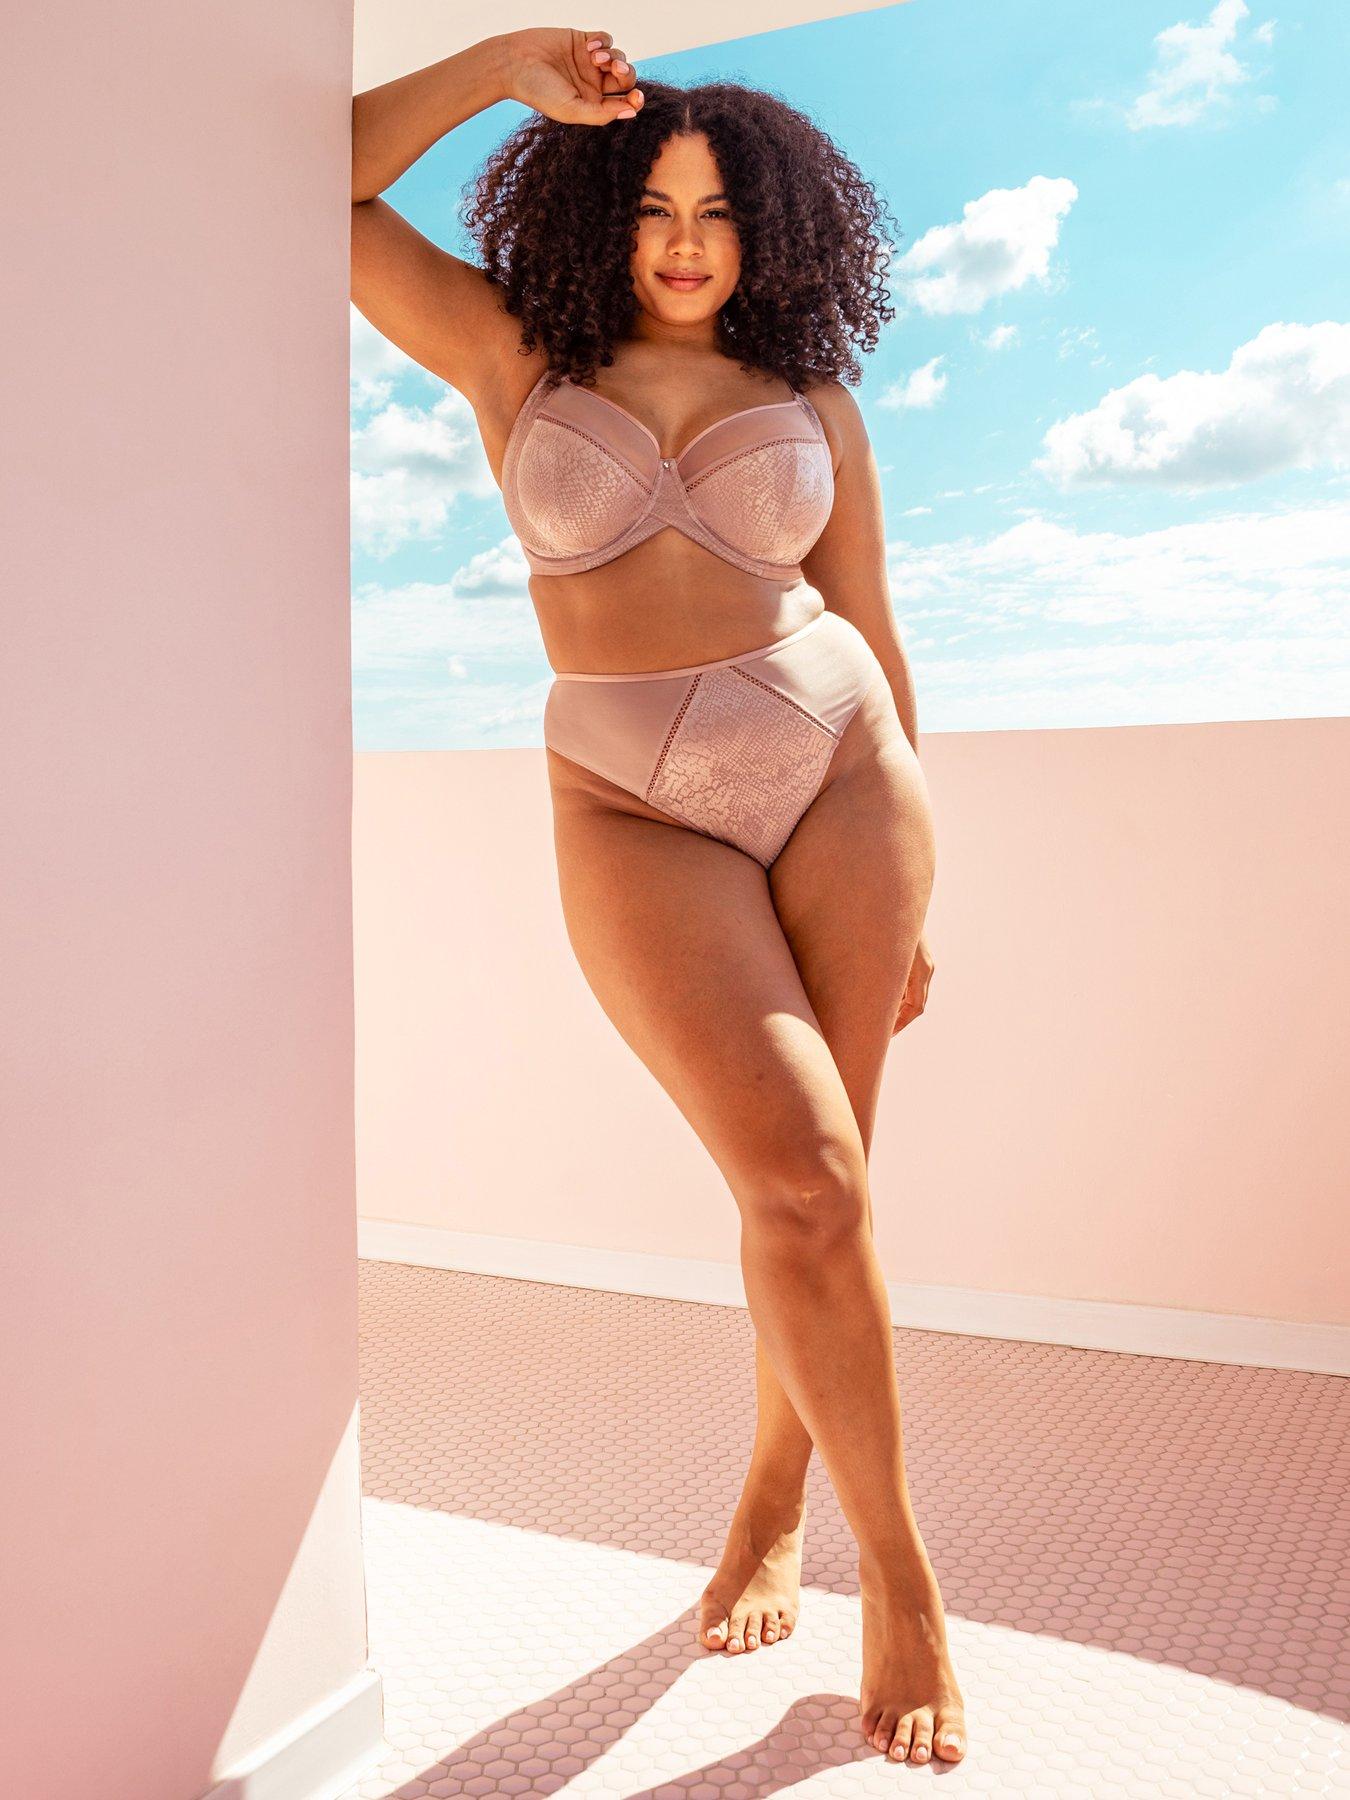 34GG Bras & Lingerie  34GG Bra Size For Curves – Page 2 – Curvy Kate UK